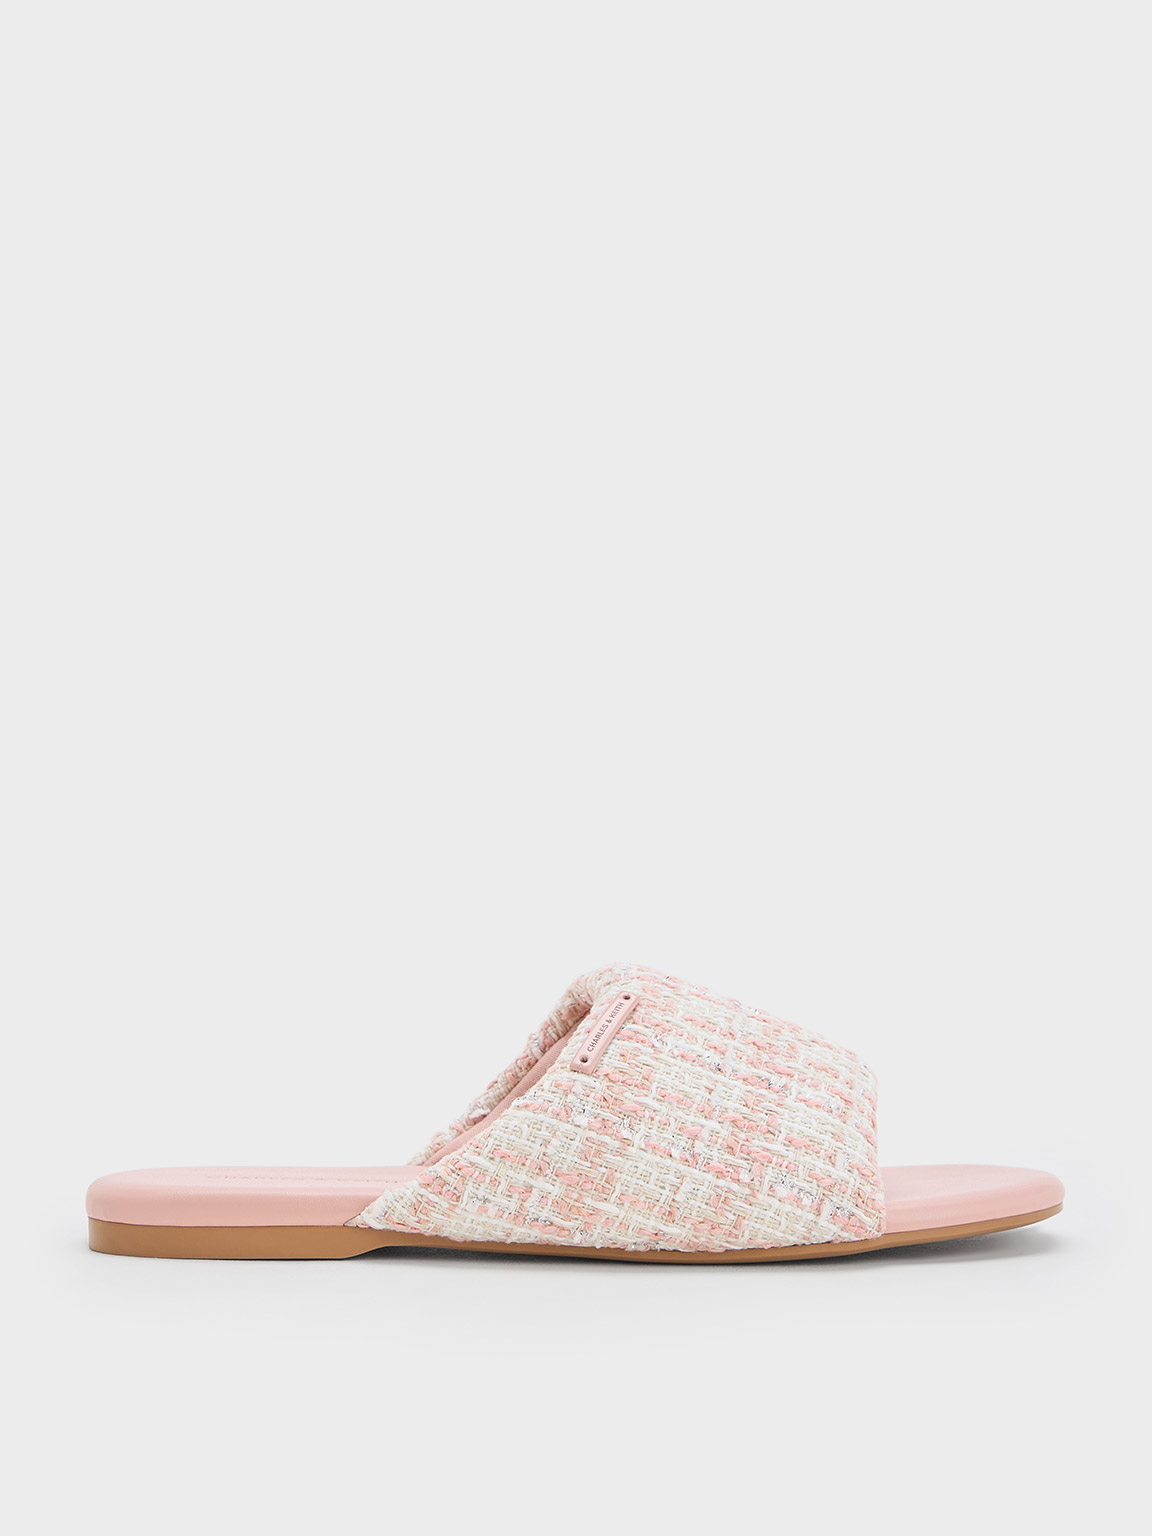 Charles & Keith Tweed Puffy Wide-strap Slide Sandals In Light Pink